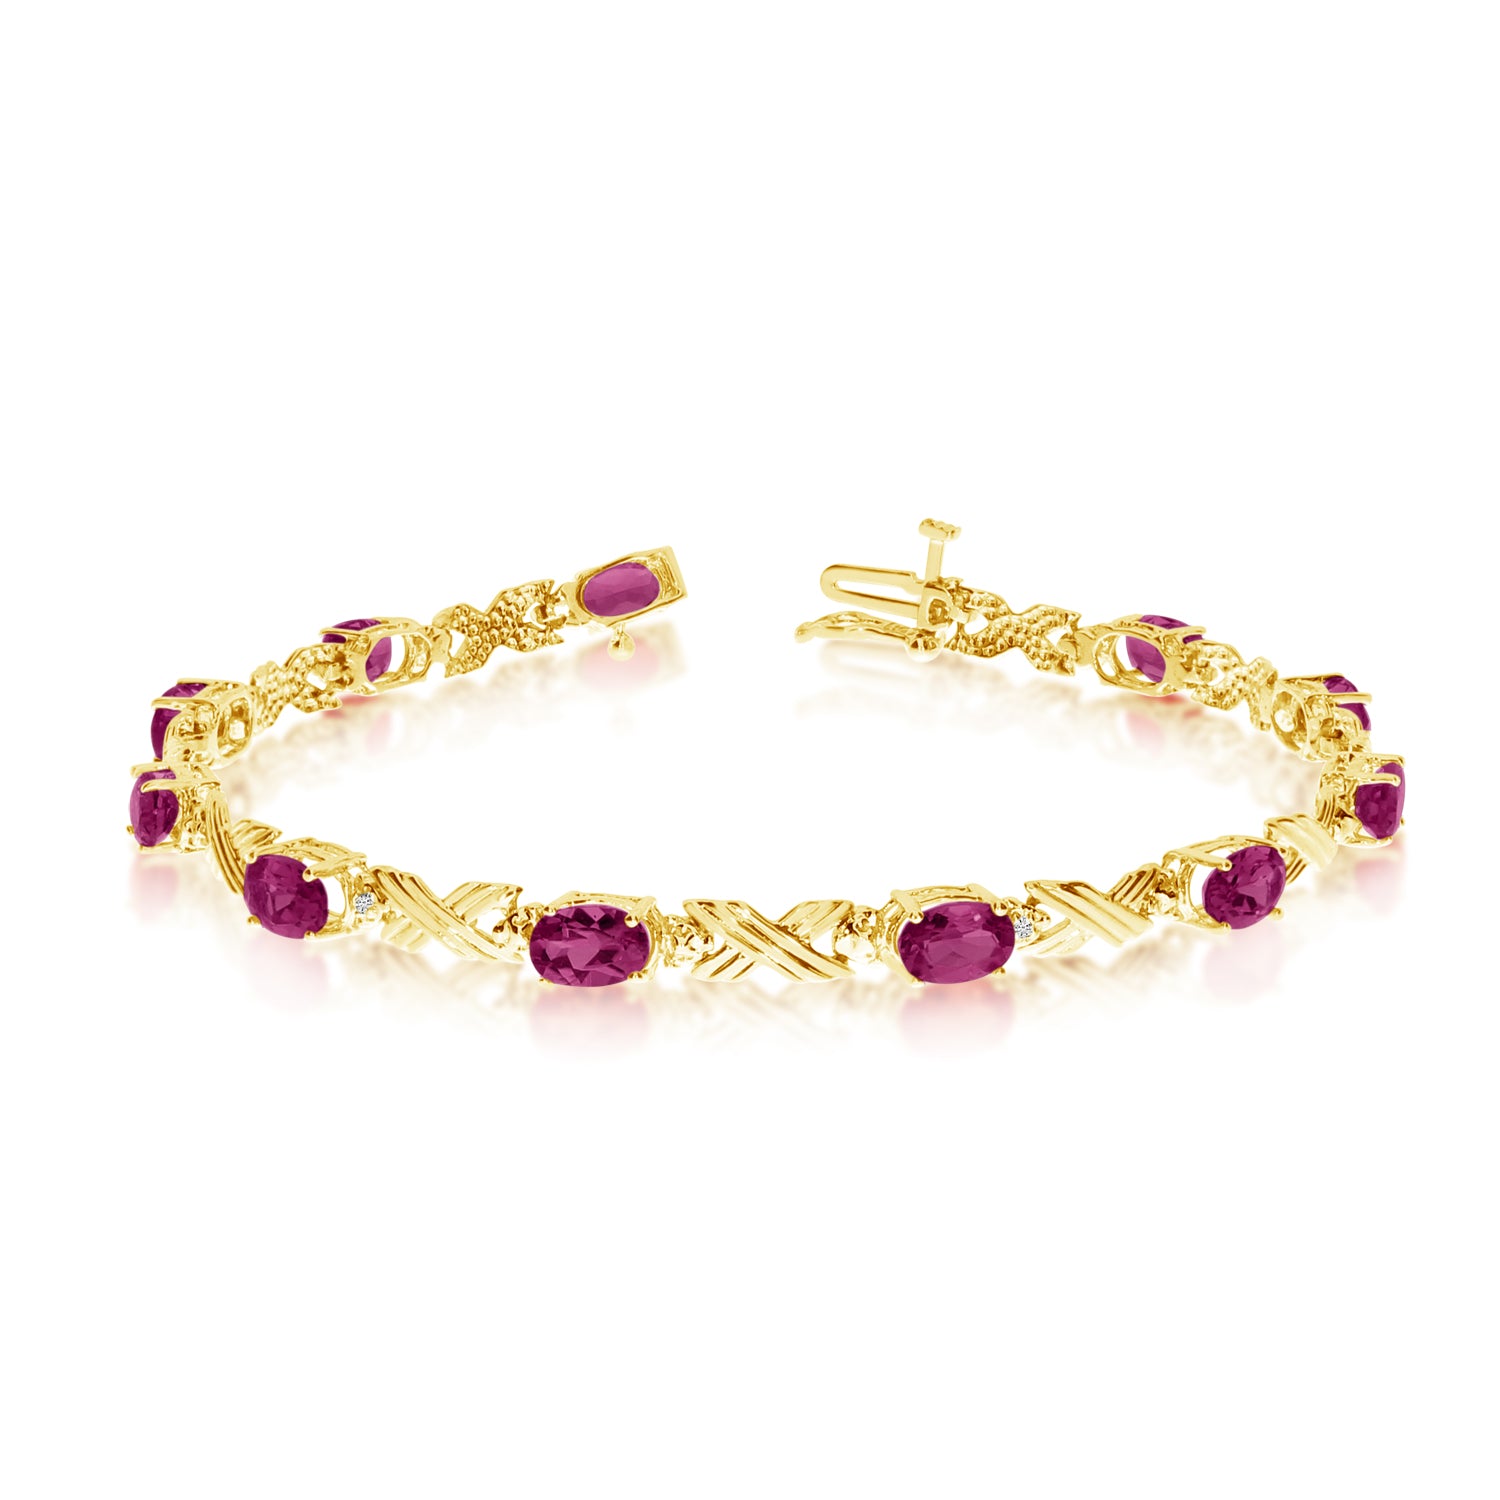 10K Yellow Gold Oval Ruby Stones And Diamonds Tennis Bracelet, 7" fine designer jewelry for men and women